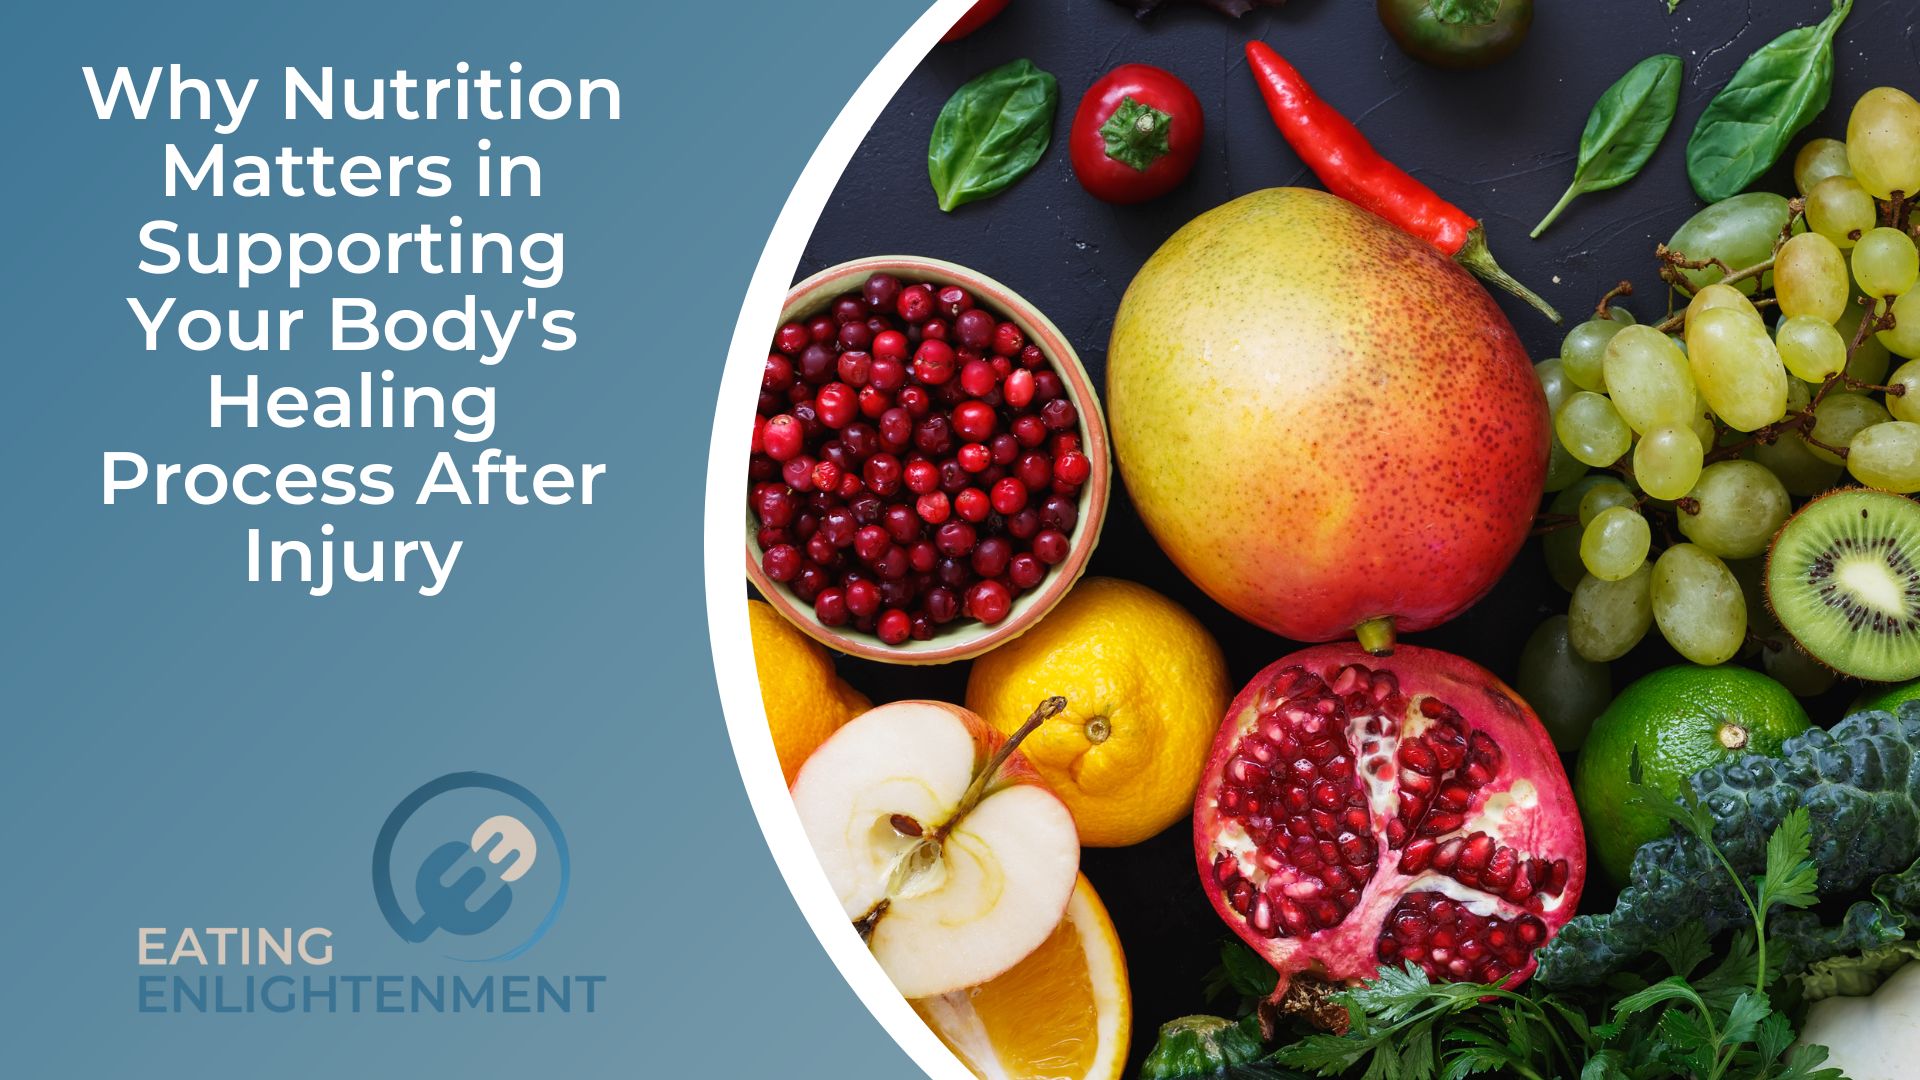 Why Nutrition Matters in Supporting Your Body's Healing Process After Injury